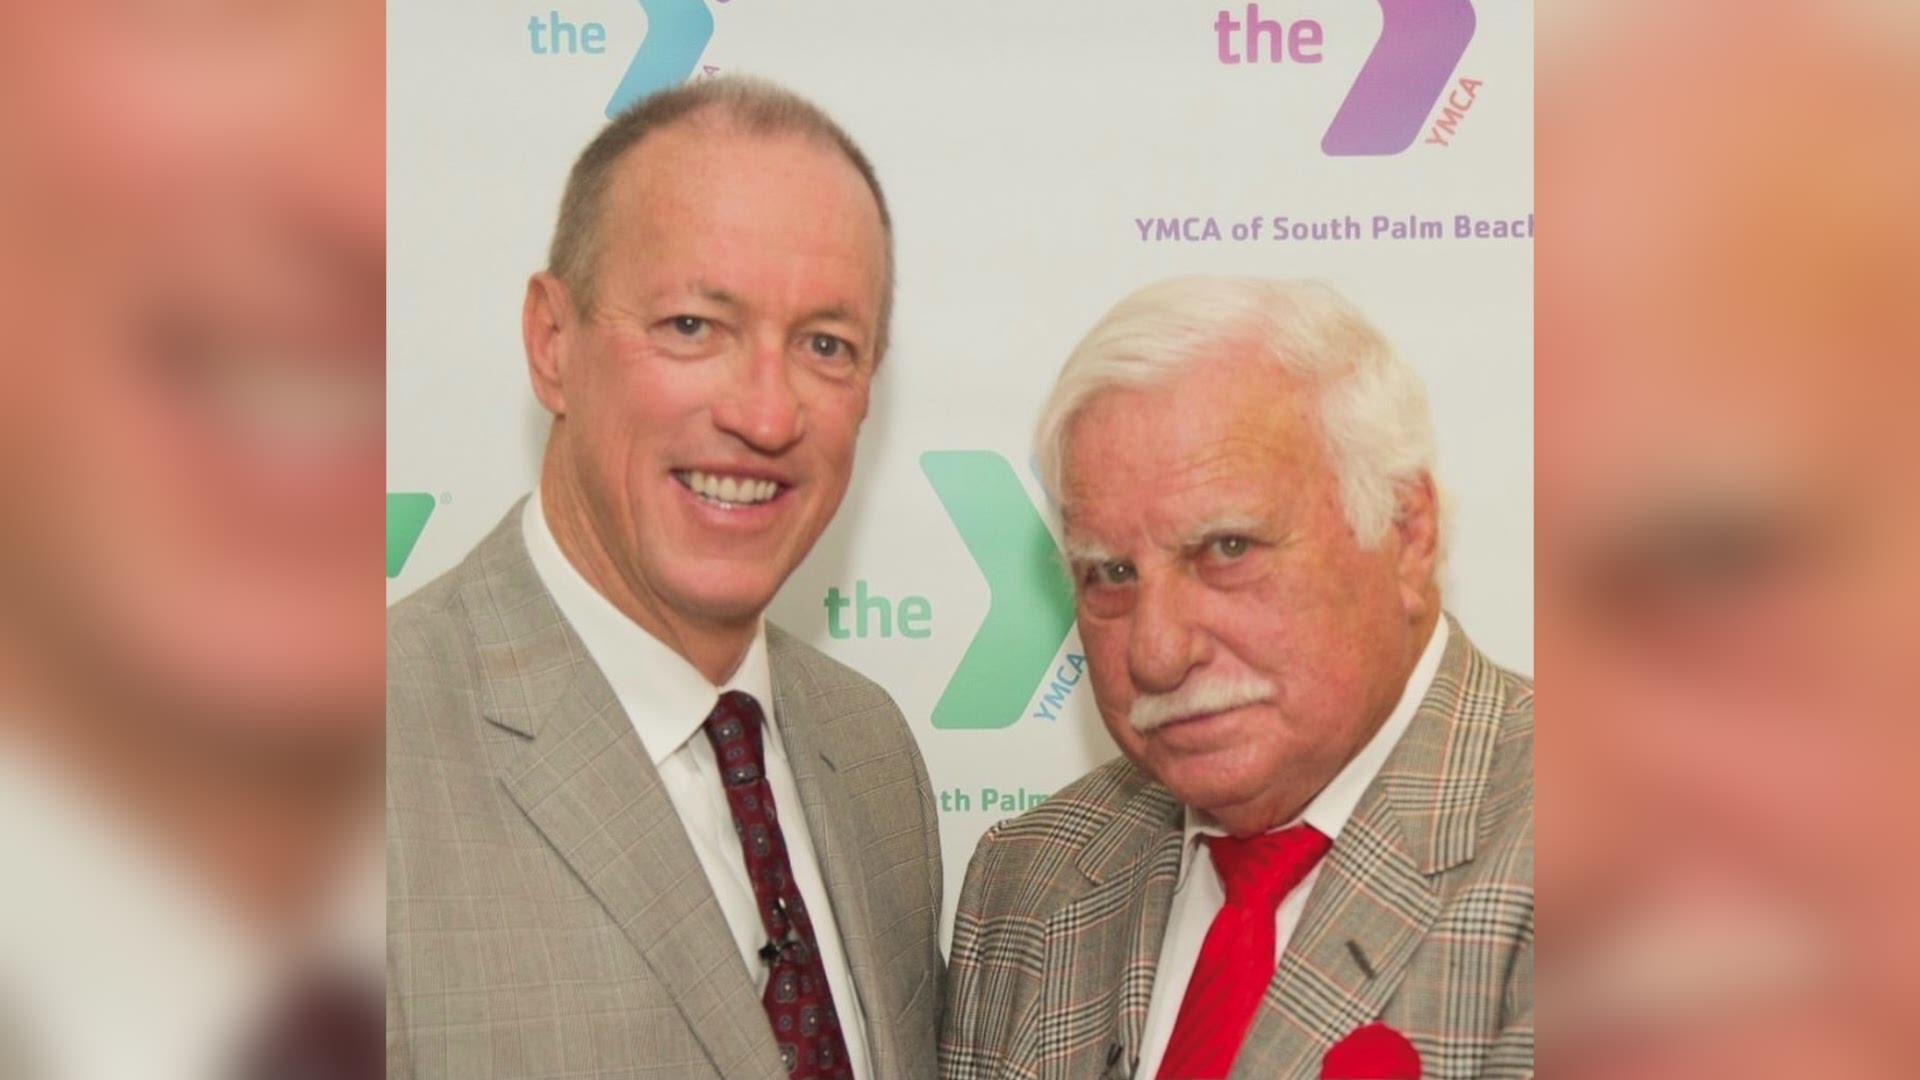 The bond between coach and player: Schnellenberger's guidance propelled Jim Kelly